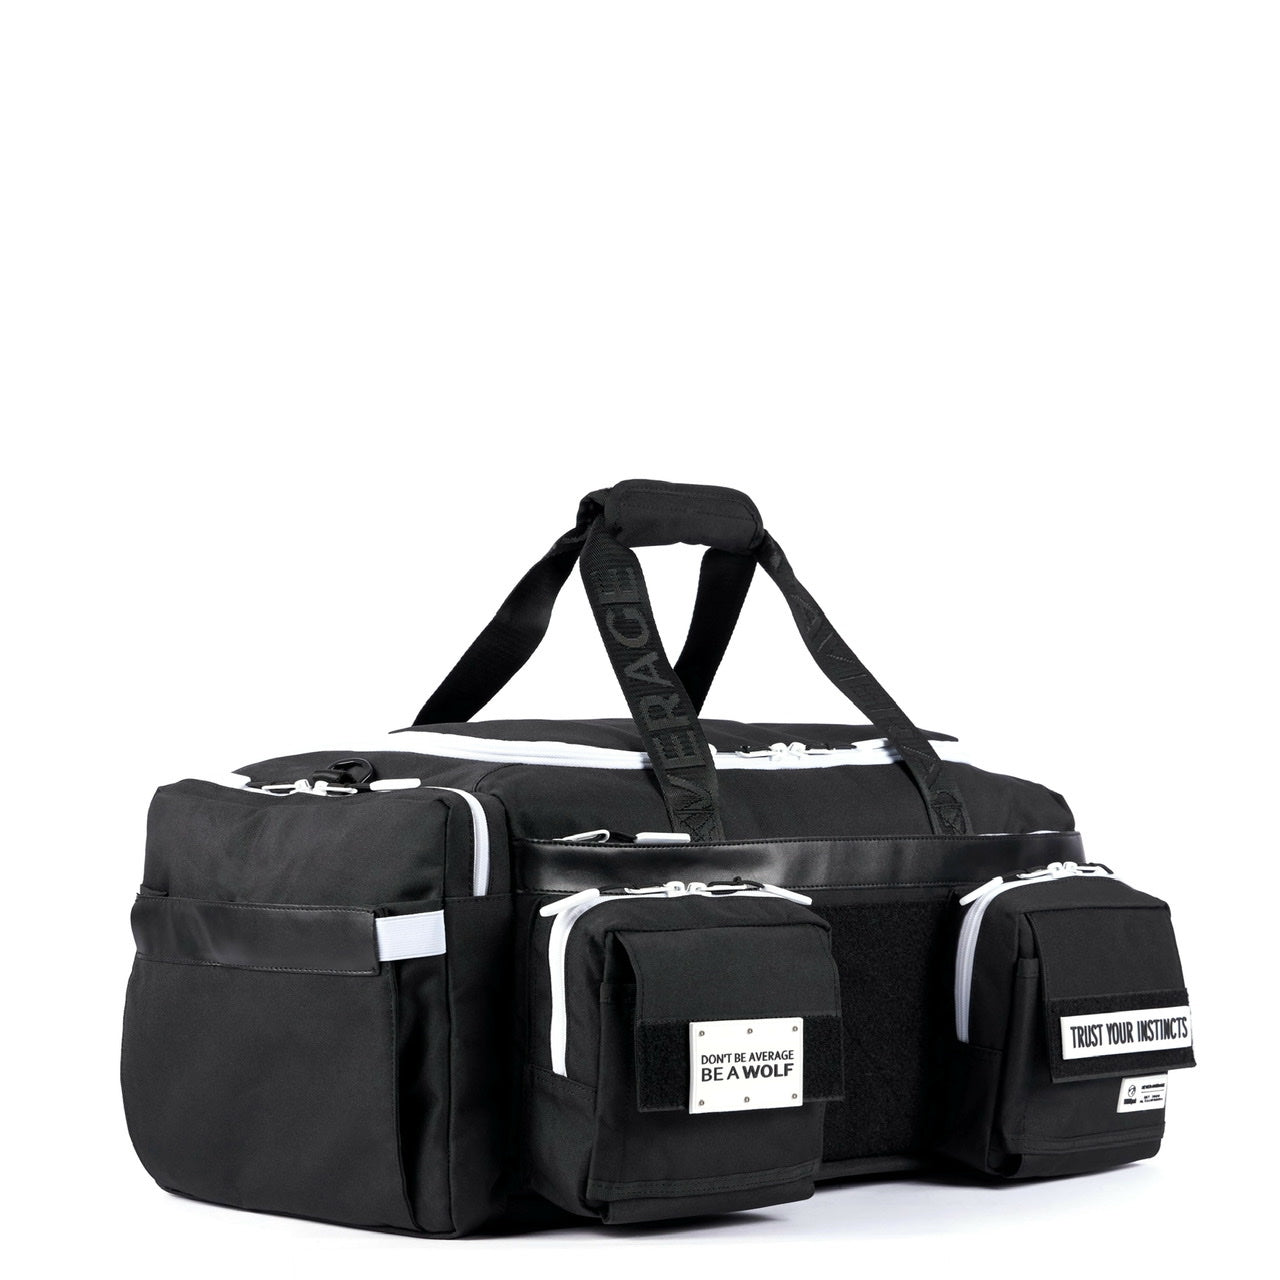 40L Ultimate Duffle Bag Alpha Black with White Accents